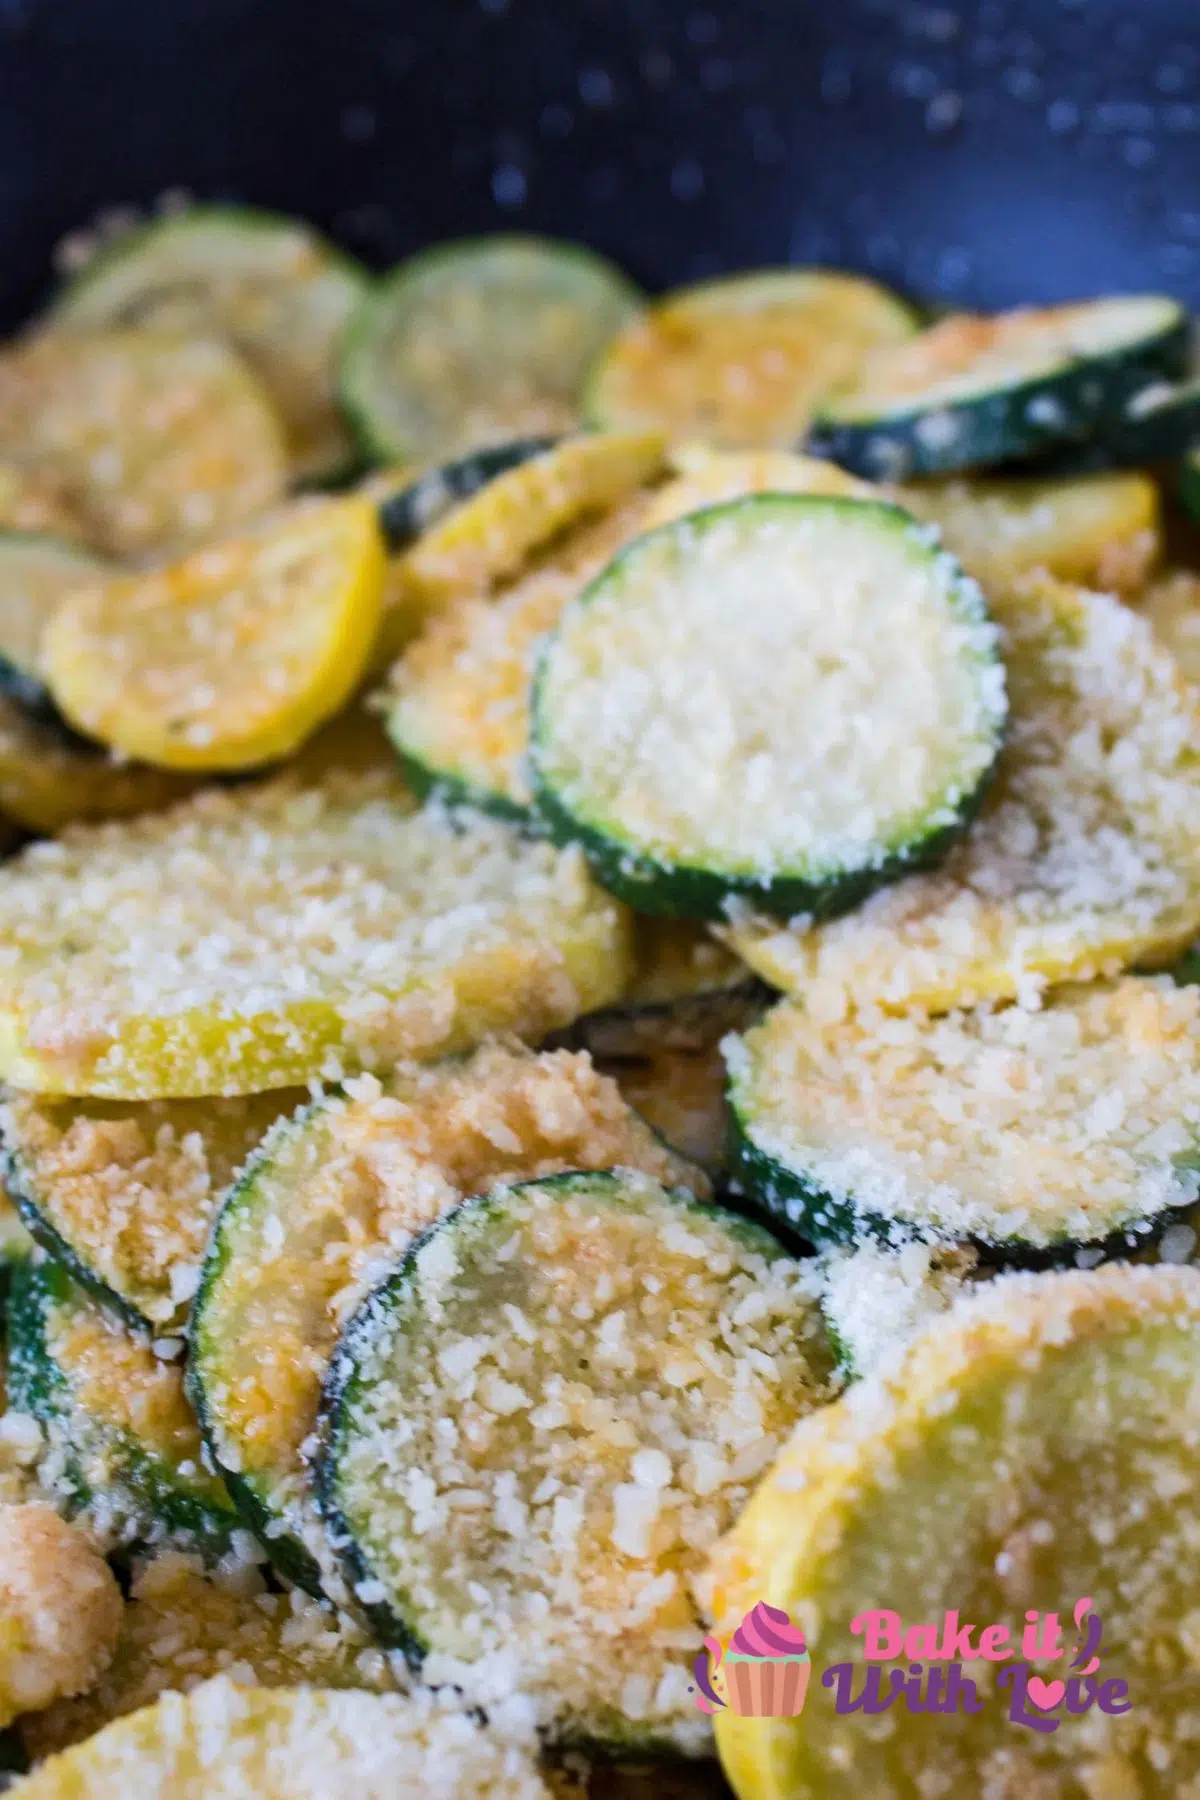 Sautéed zucchini and yellow squash with garlic and Parmesan cheese is one of the absolute easiest ways ever to enjoy your abundant crop of summer squash! These are two of my favorite veggies, and they are absolutely delicious when pan-fried with garlic and then tossed in Parmesan! Your entire family will enjoy this healthy, easy side dish. BakeItWithLove.com #bakeitwithlove #sauteed #zucchini #squash #recipe #sidedish